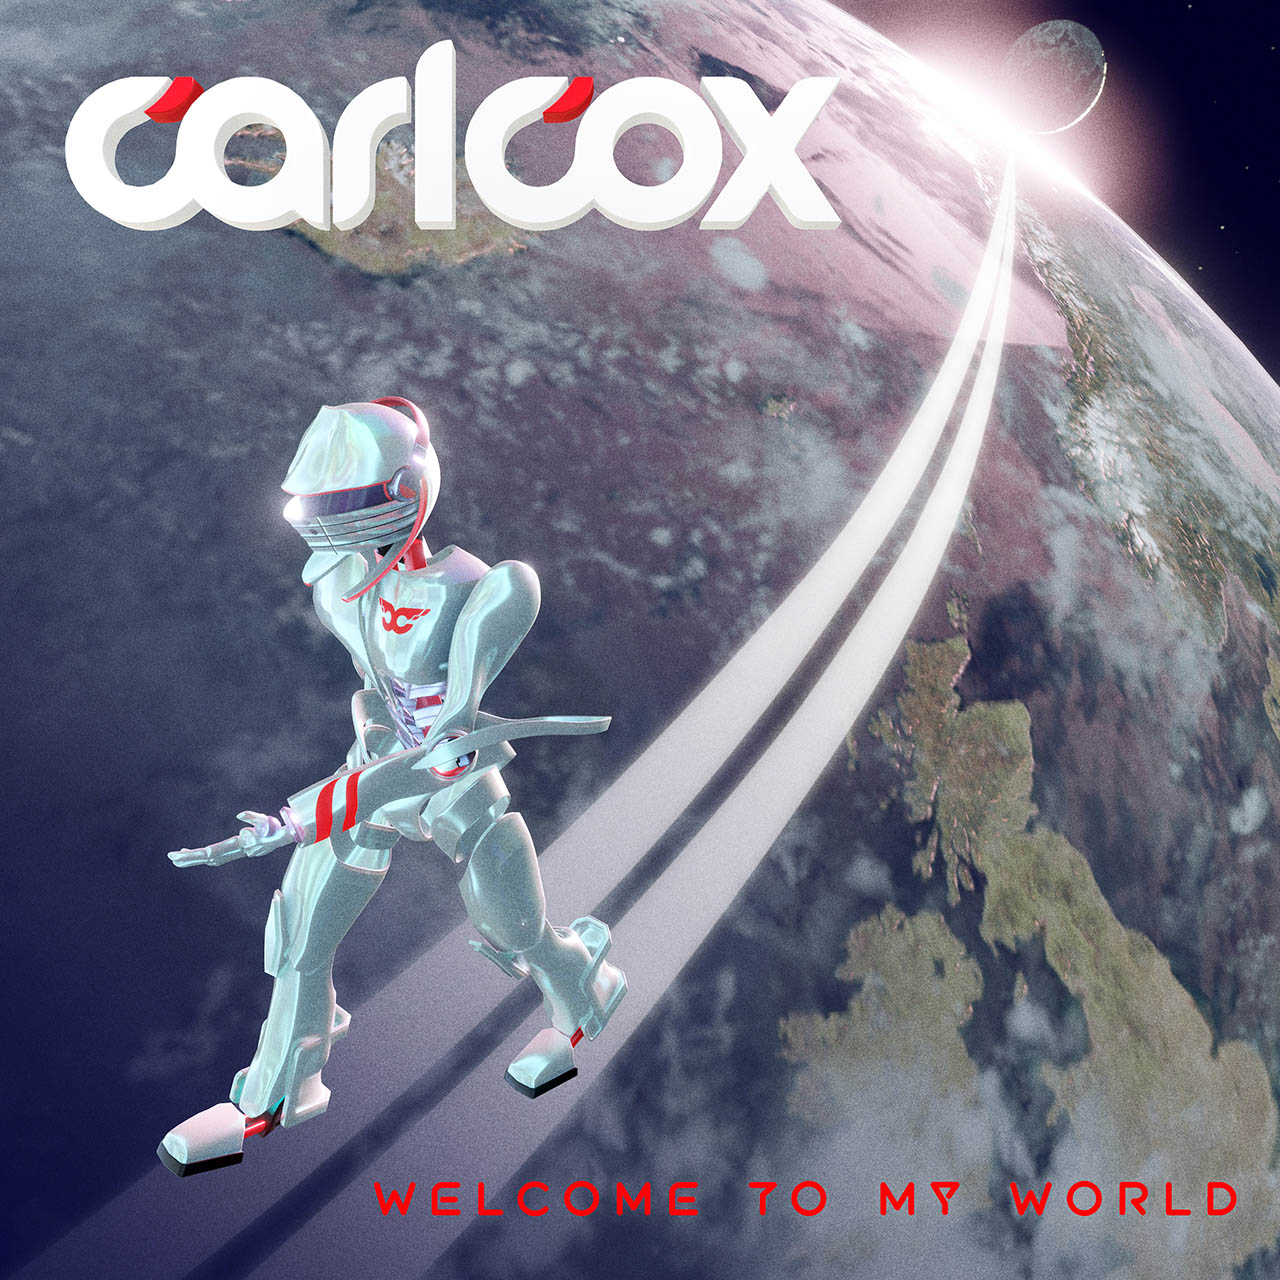 Carl Cox - Welcome to my world